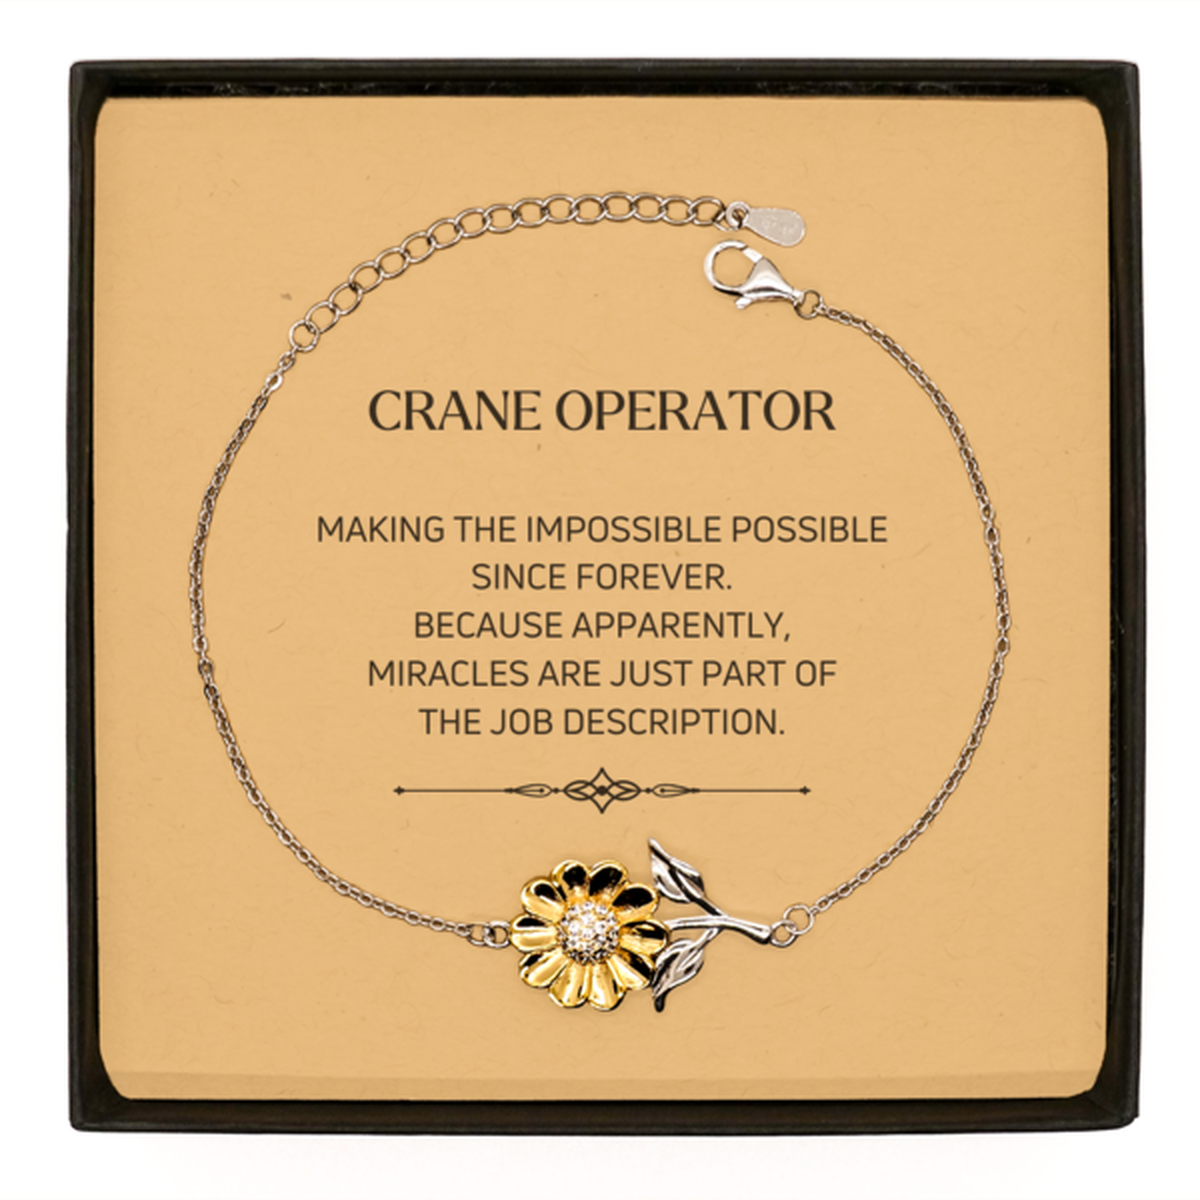 Funny Crane Operator Gifts, Miracles are just part of the job description, Inspirational Birthday Sunflower Bracelet For Crane Operator, Men, Women, Coworkers, Friends, Boss